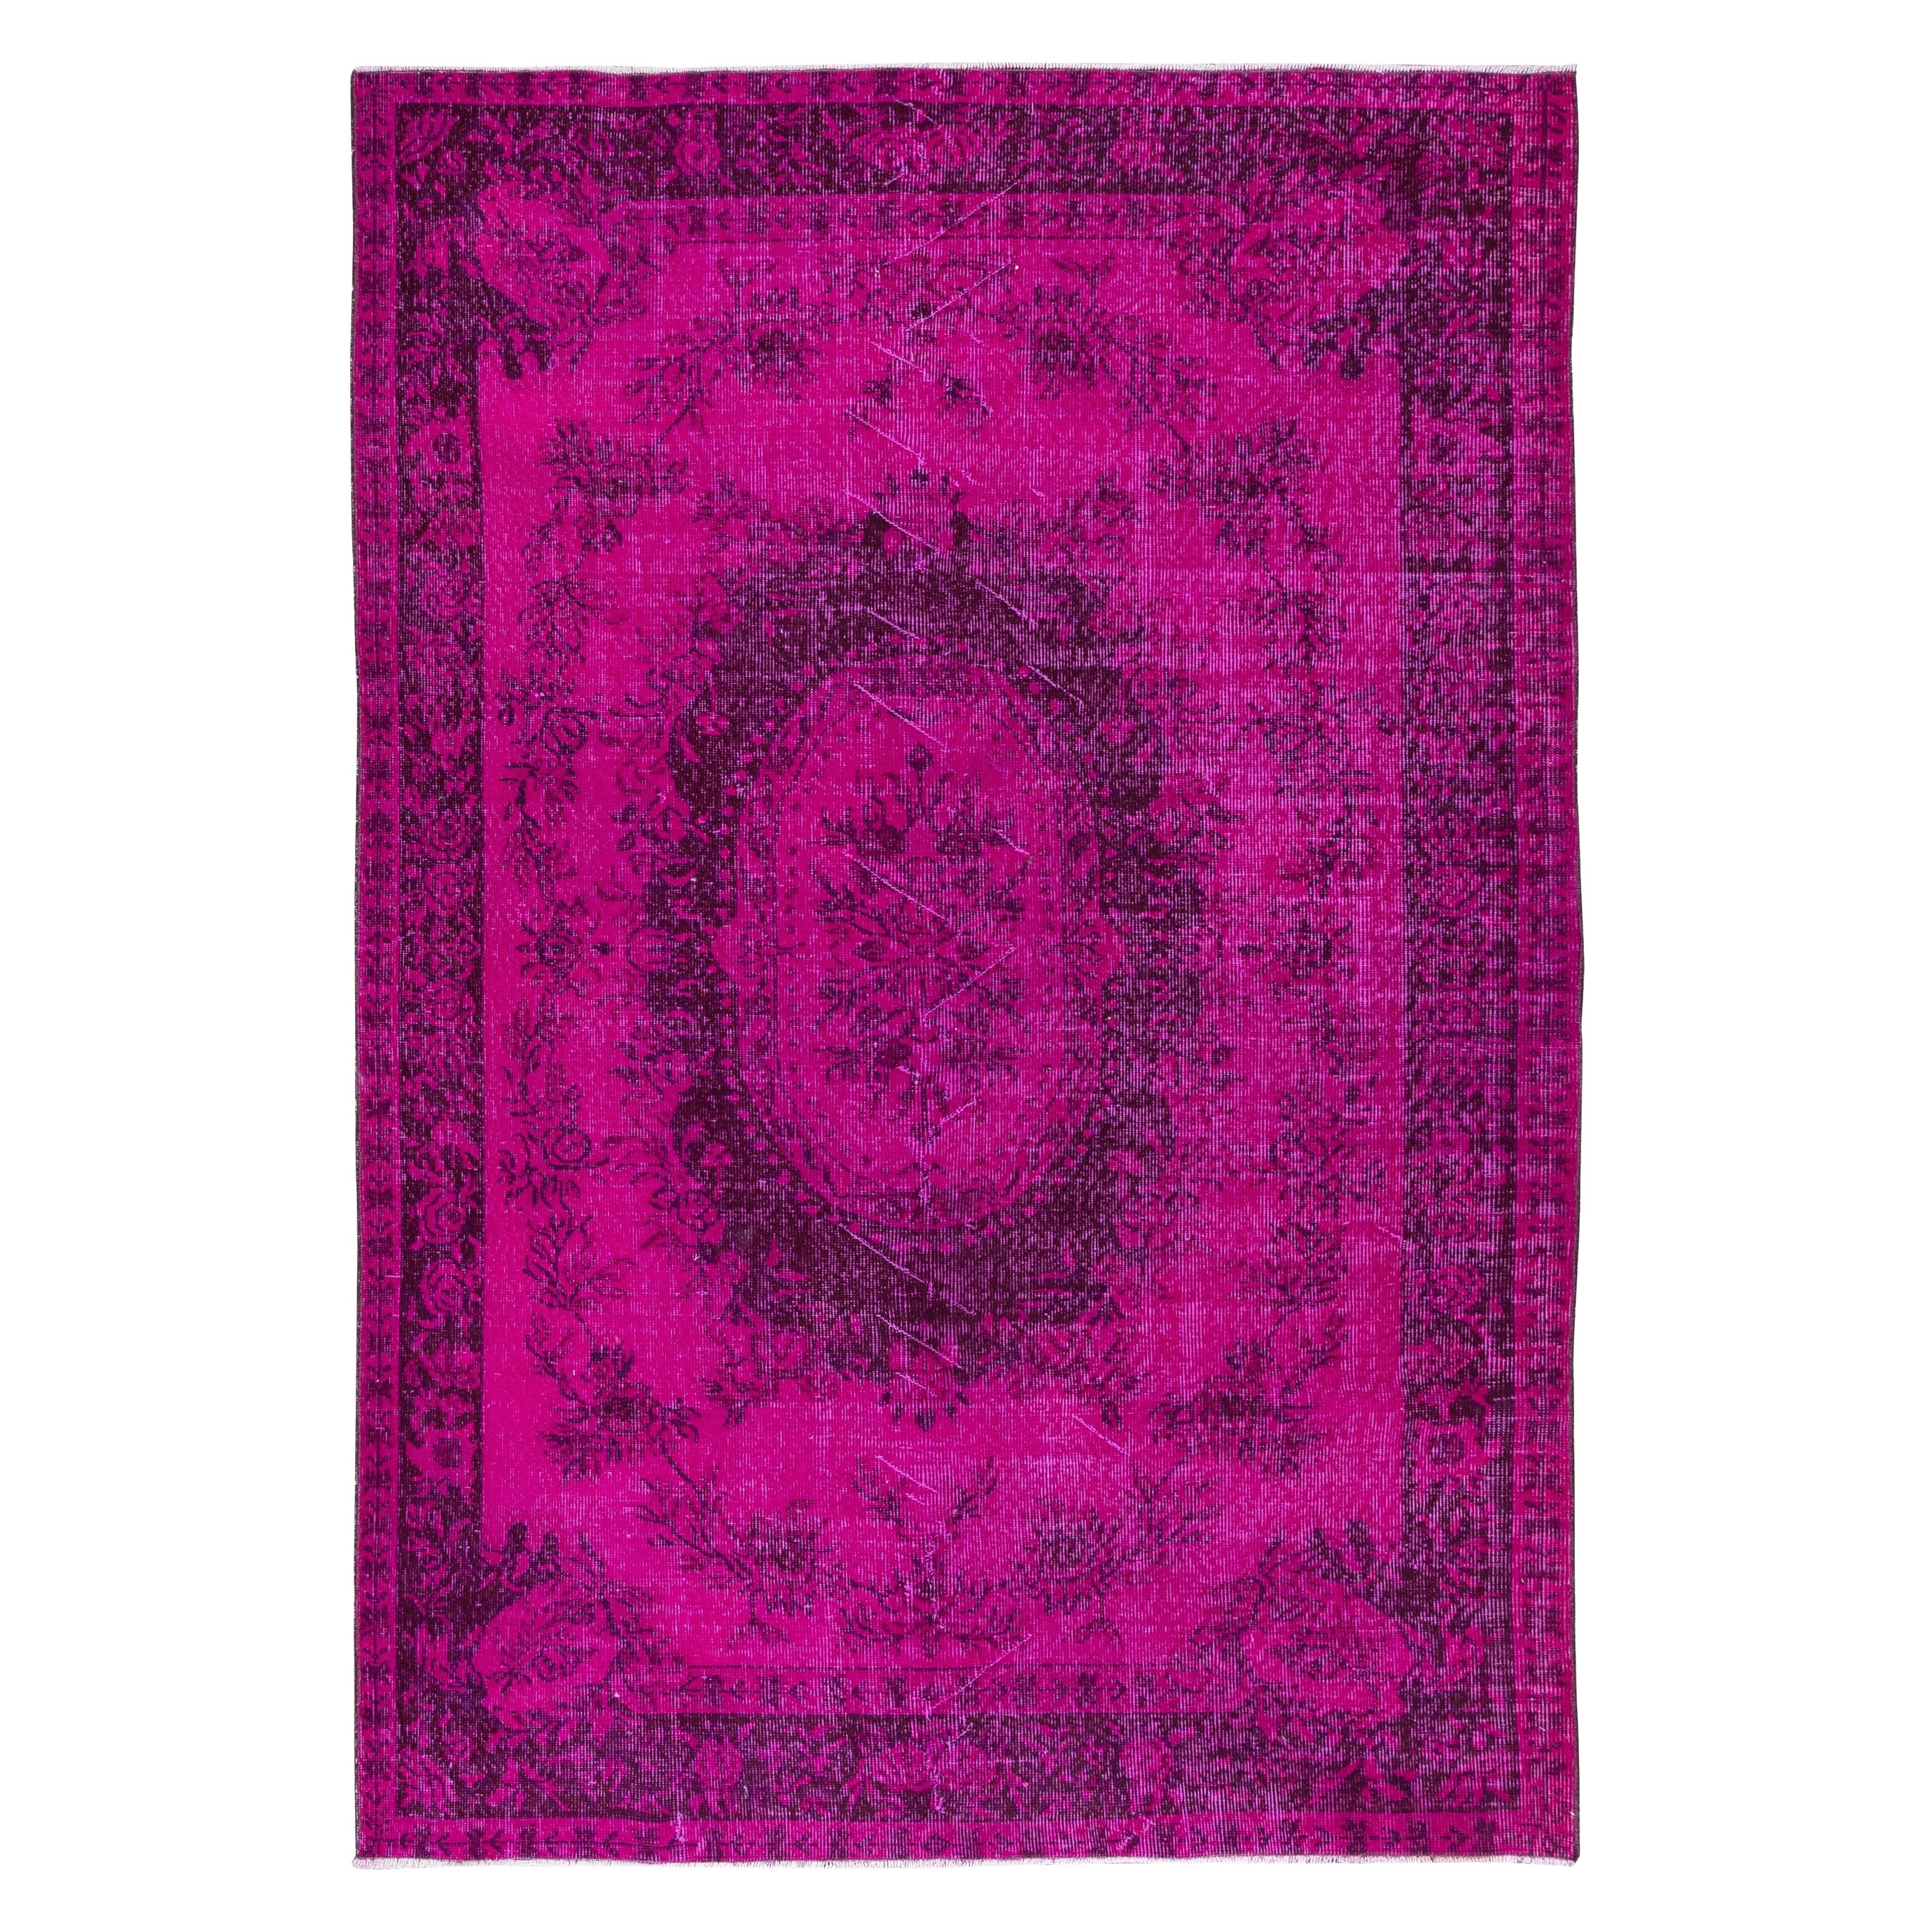 6x8.6 Ft Hot Pink Aubusson Inspired Rug for Modern Interiors, Handmade in Turkey For Sale